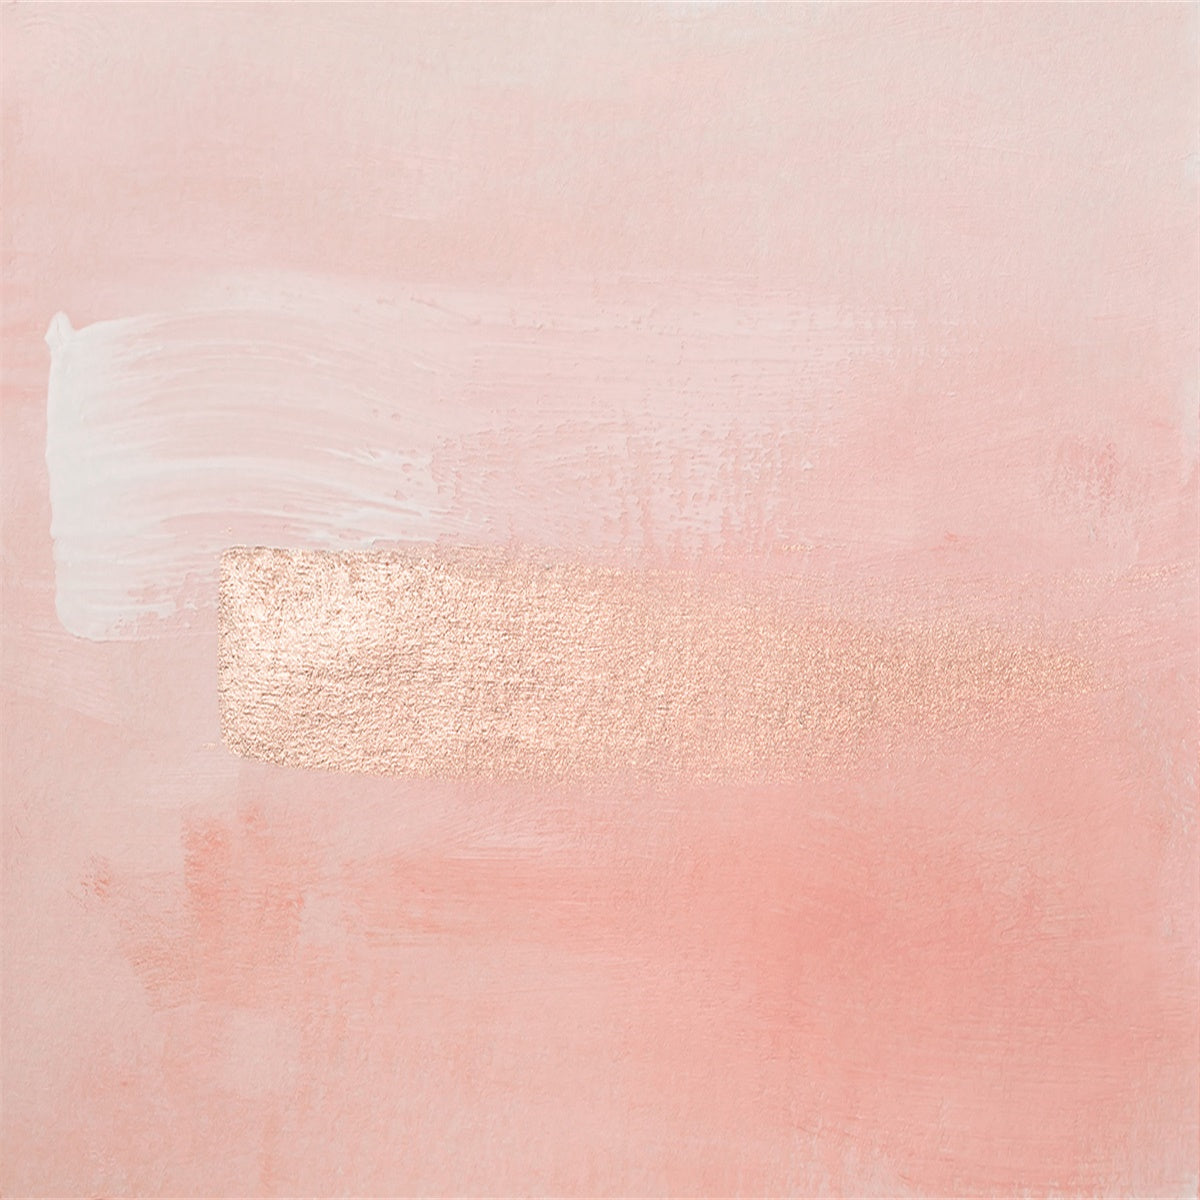 Buy Abstract Pink Wall Photography Backdrops for Picture Online ...